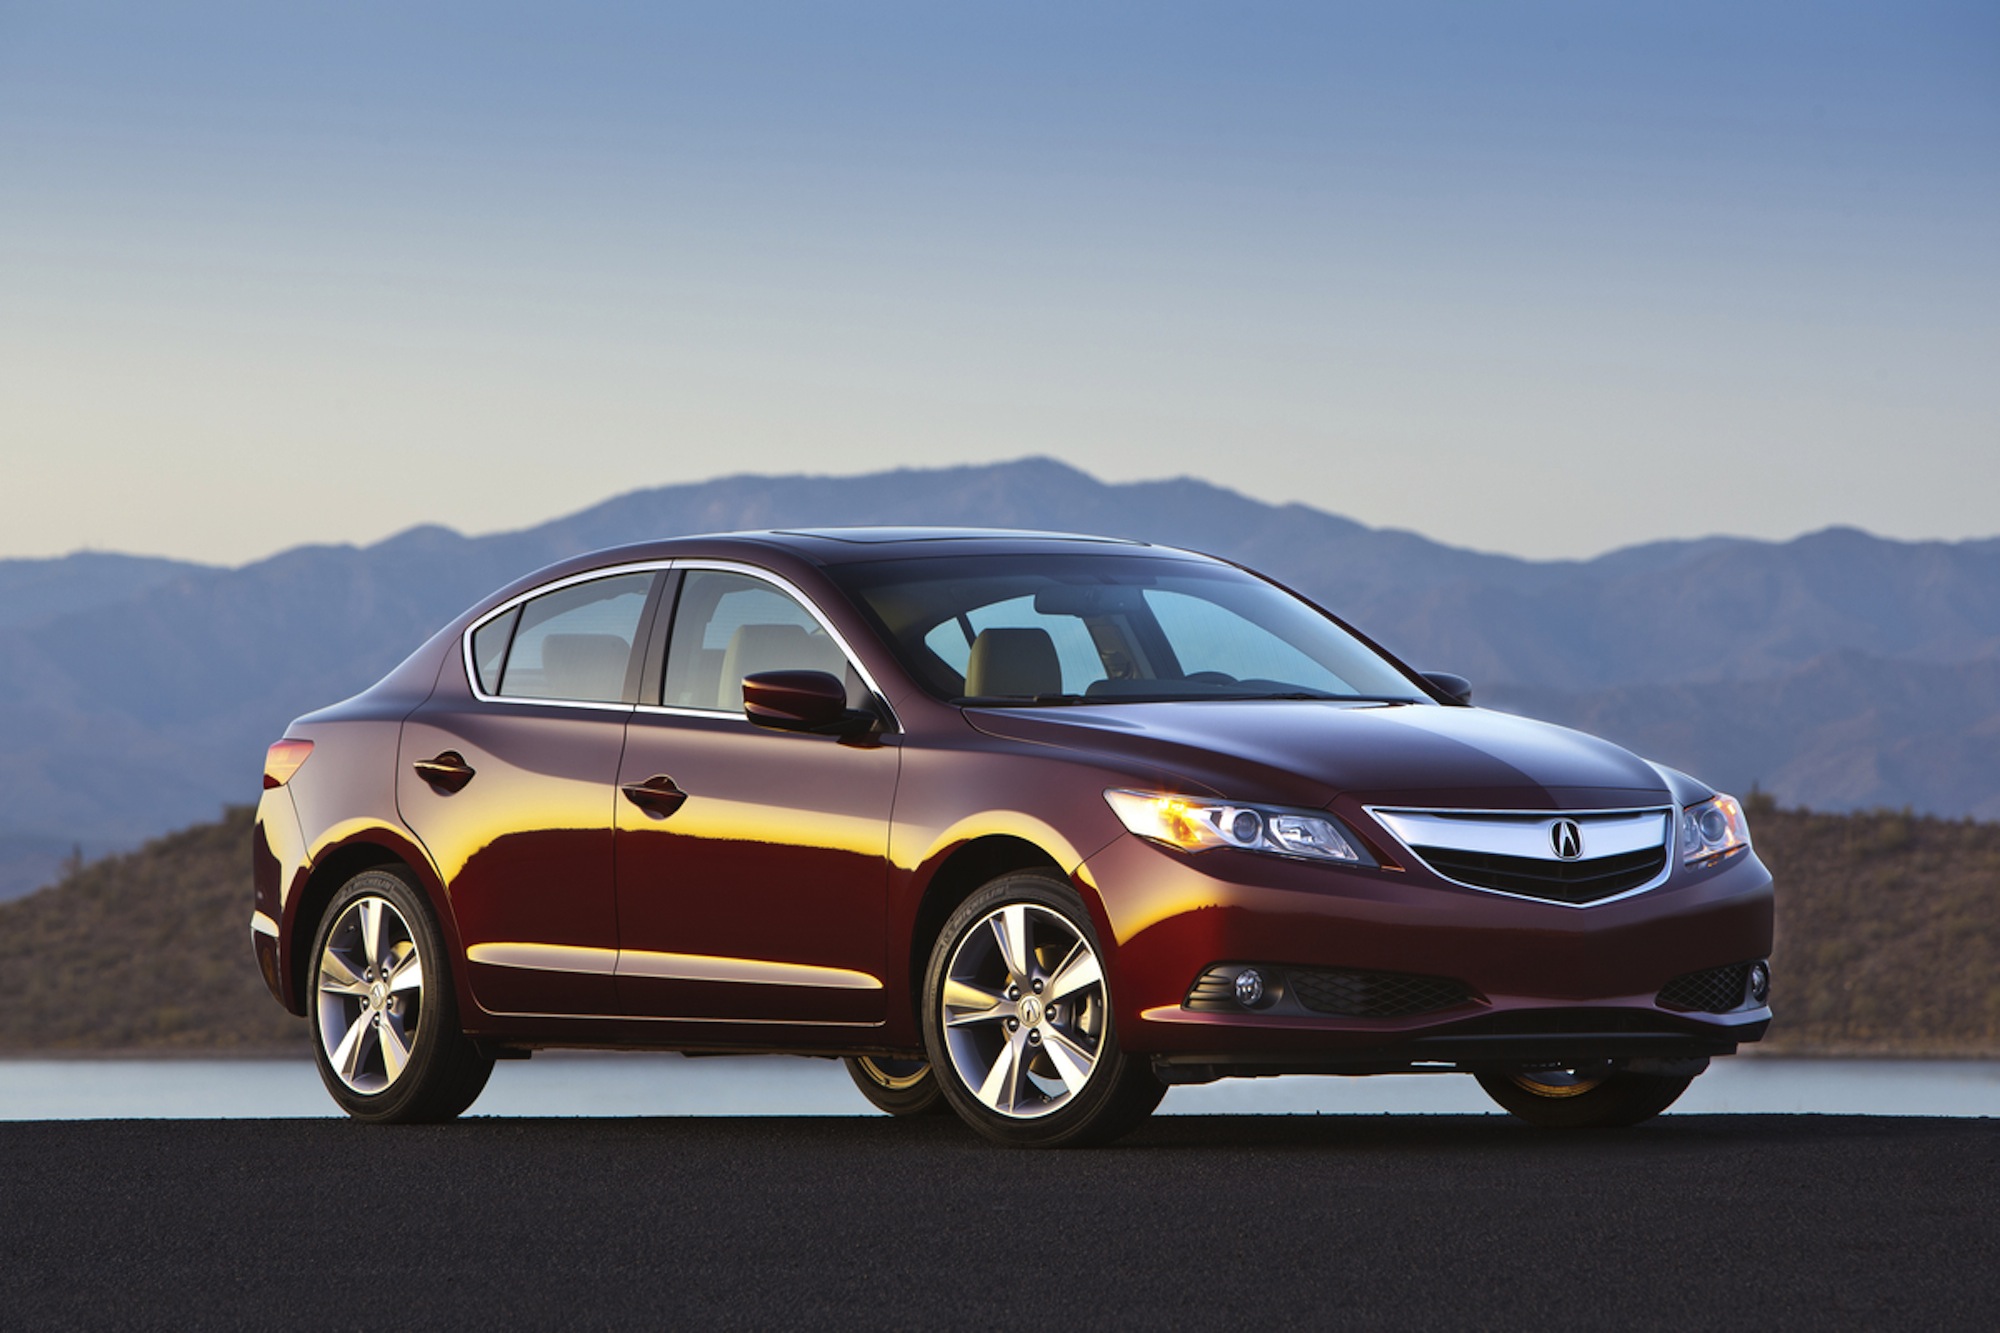 2013 Acura ILX Priced From $26,795